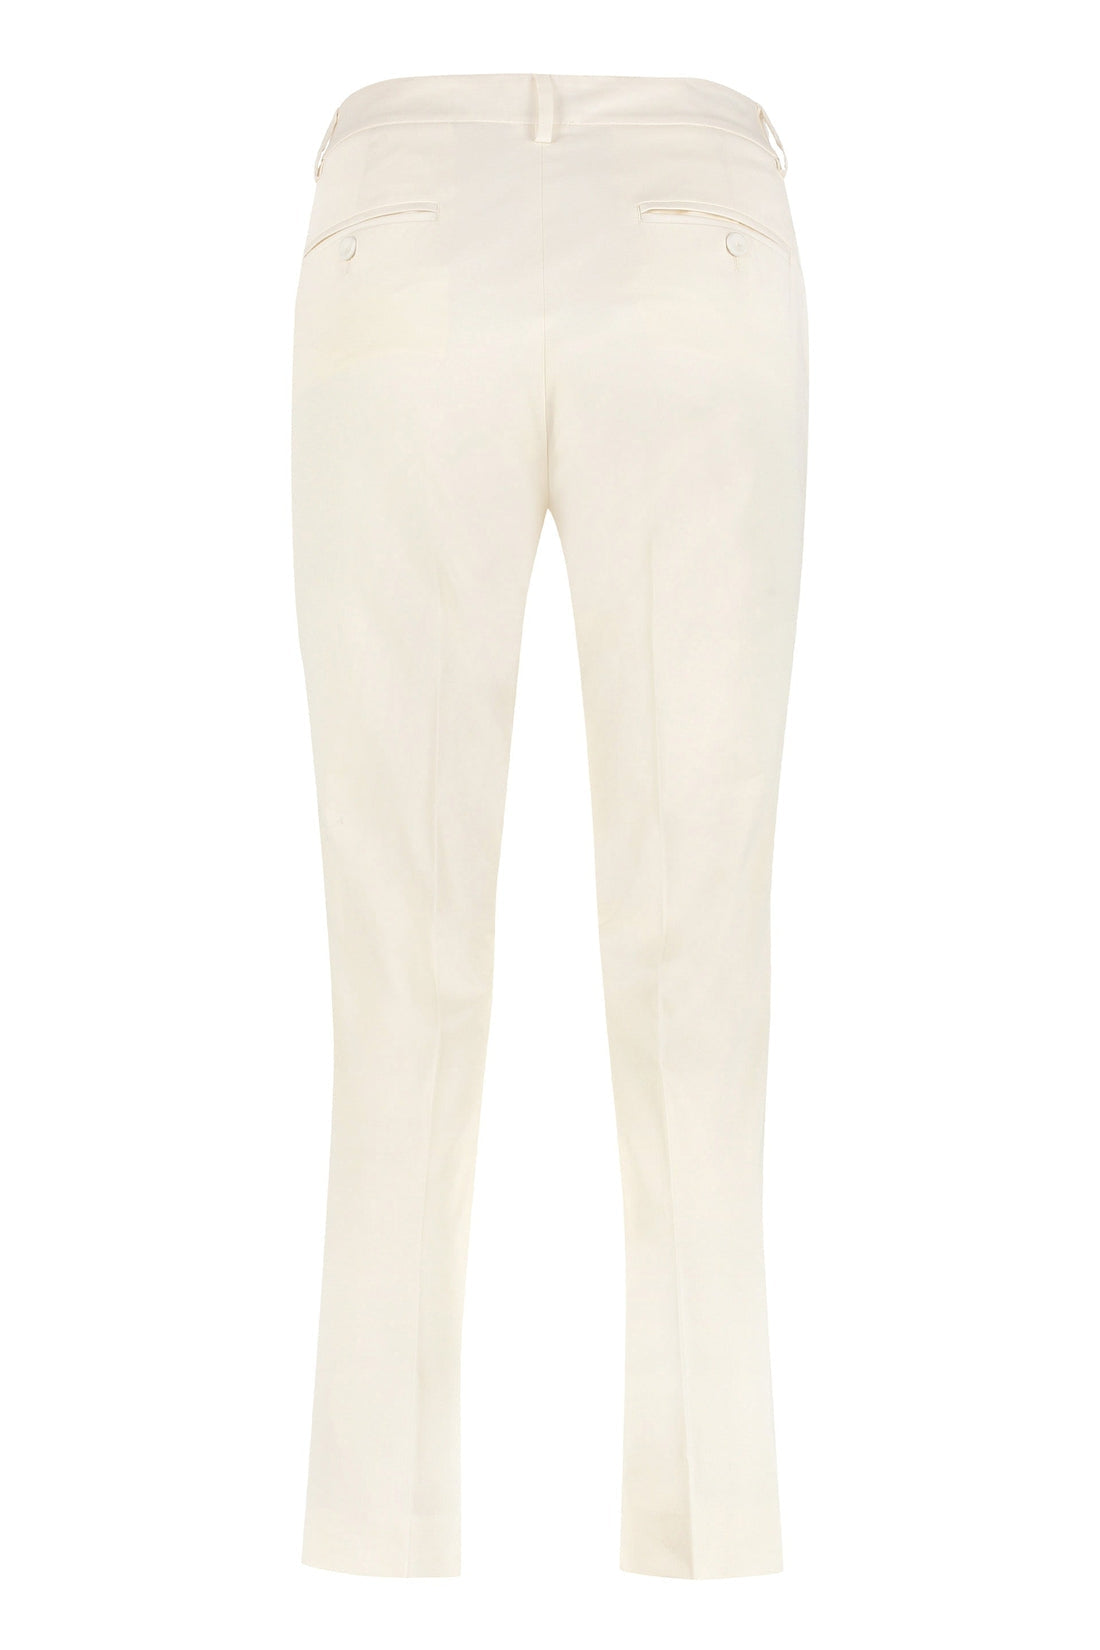 Weekend Max Mara-OUTLET-SALE-Stretch cotton stovepipe trousers-ARCHIVIST